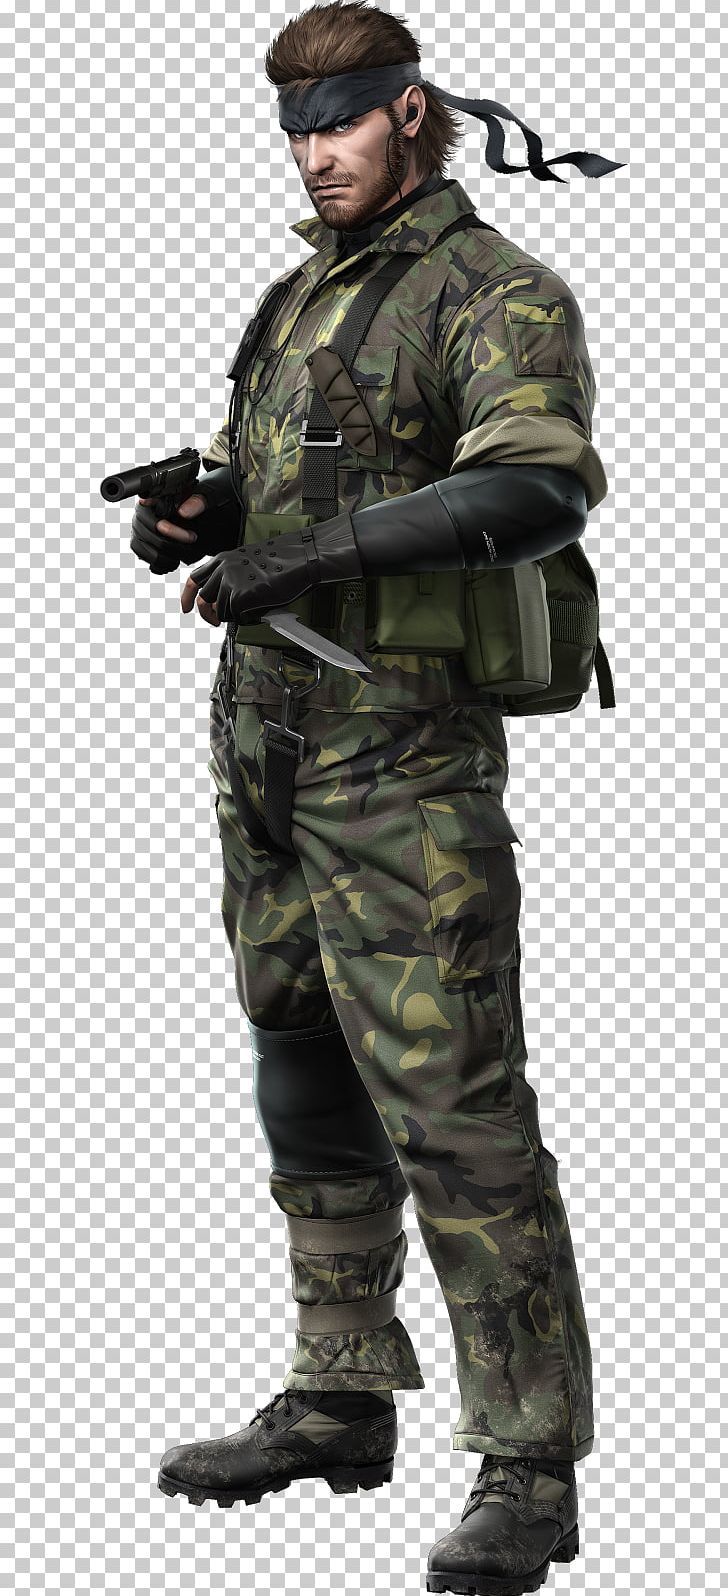 Snake From Metal Gear Solid